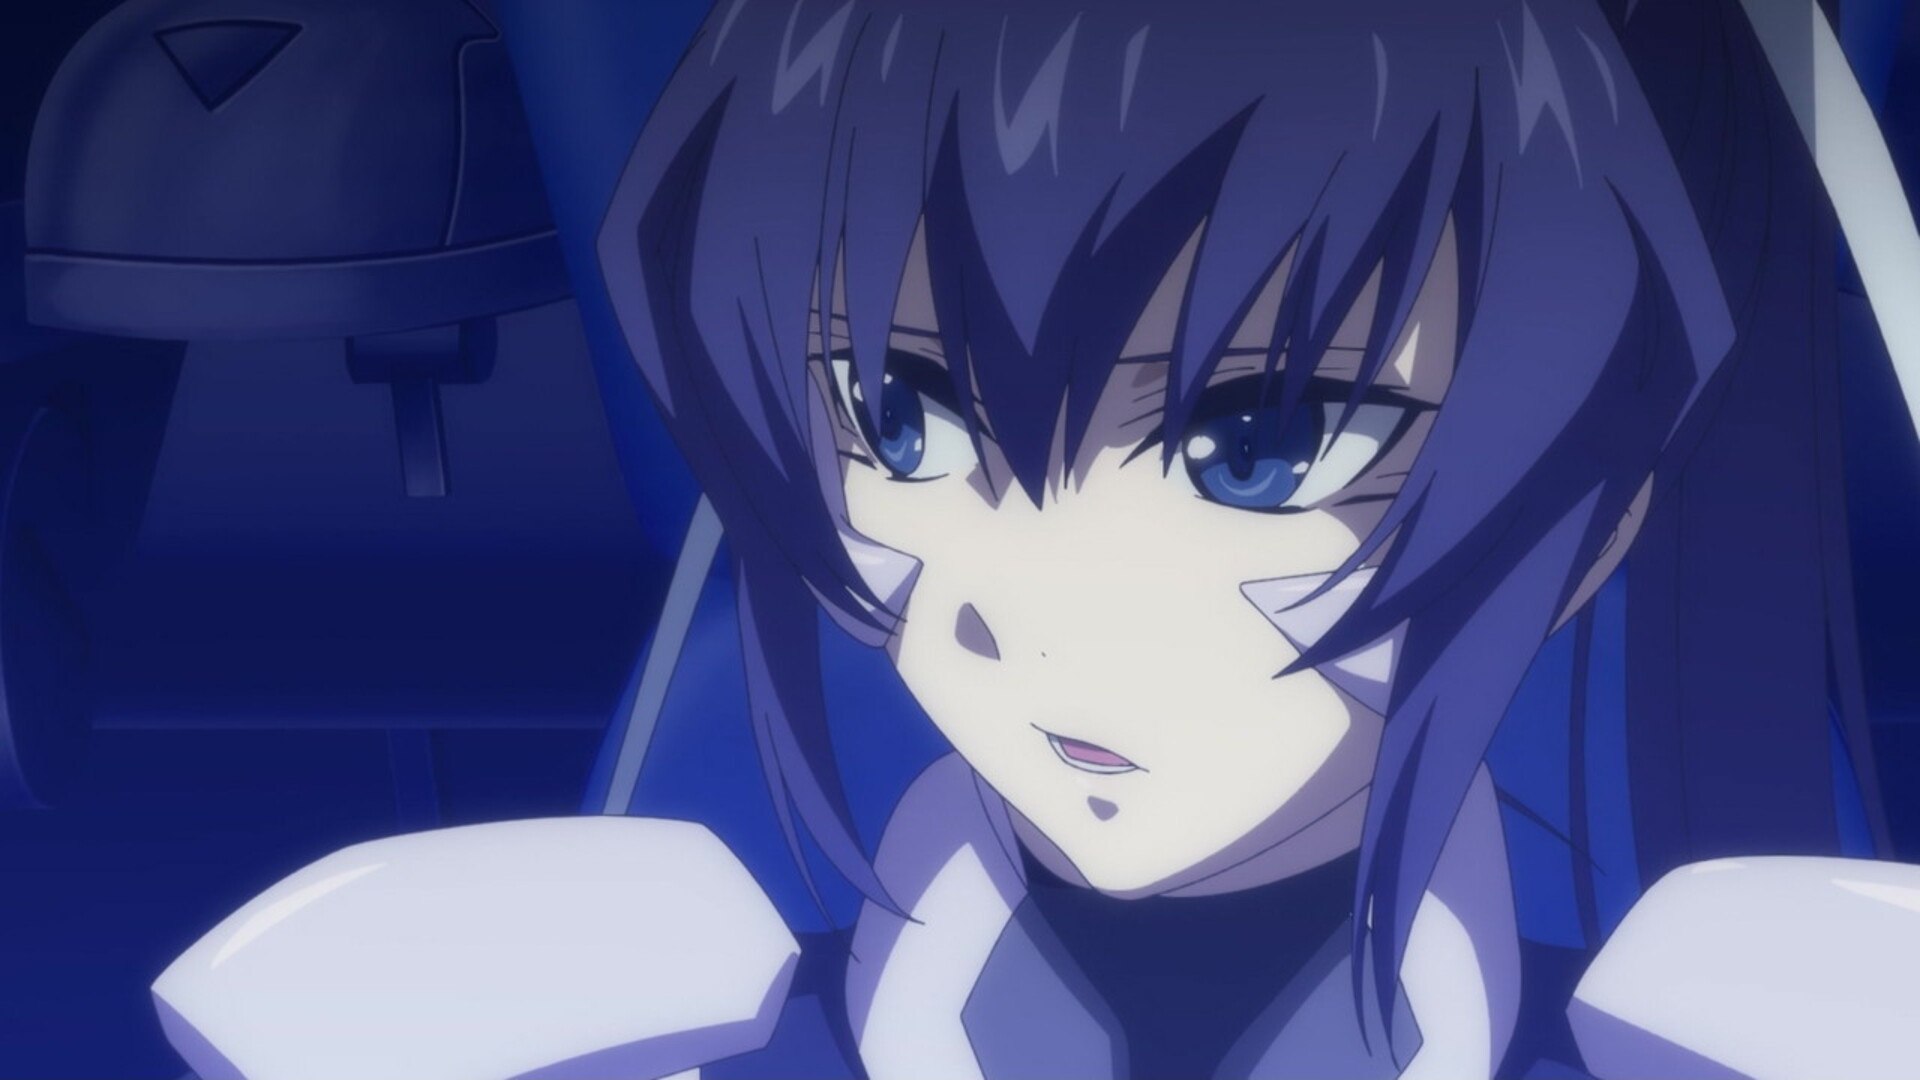 does muv luv alternative have h scenes